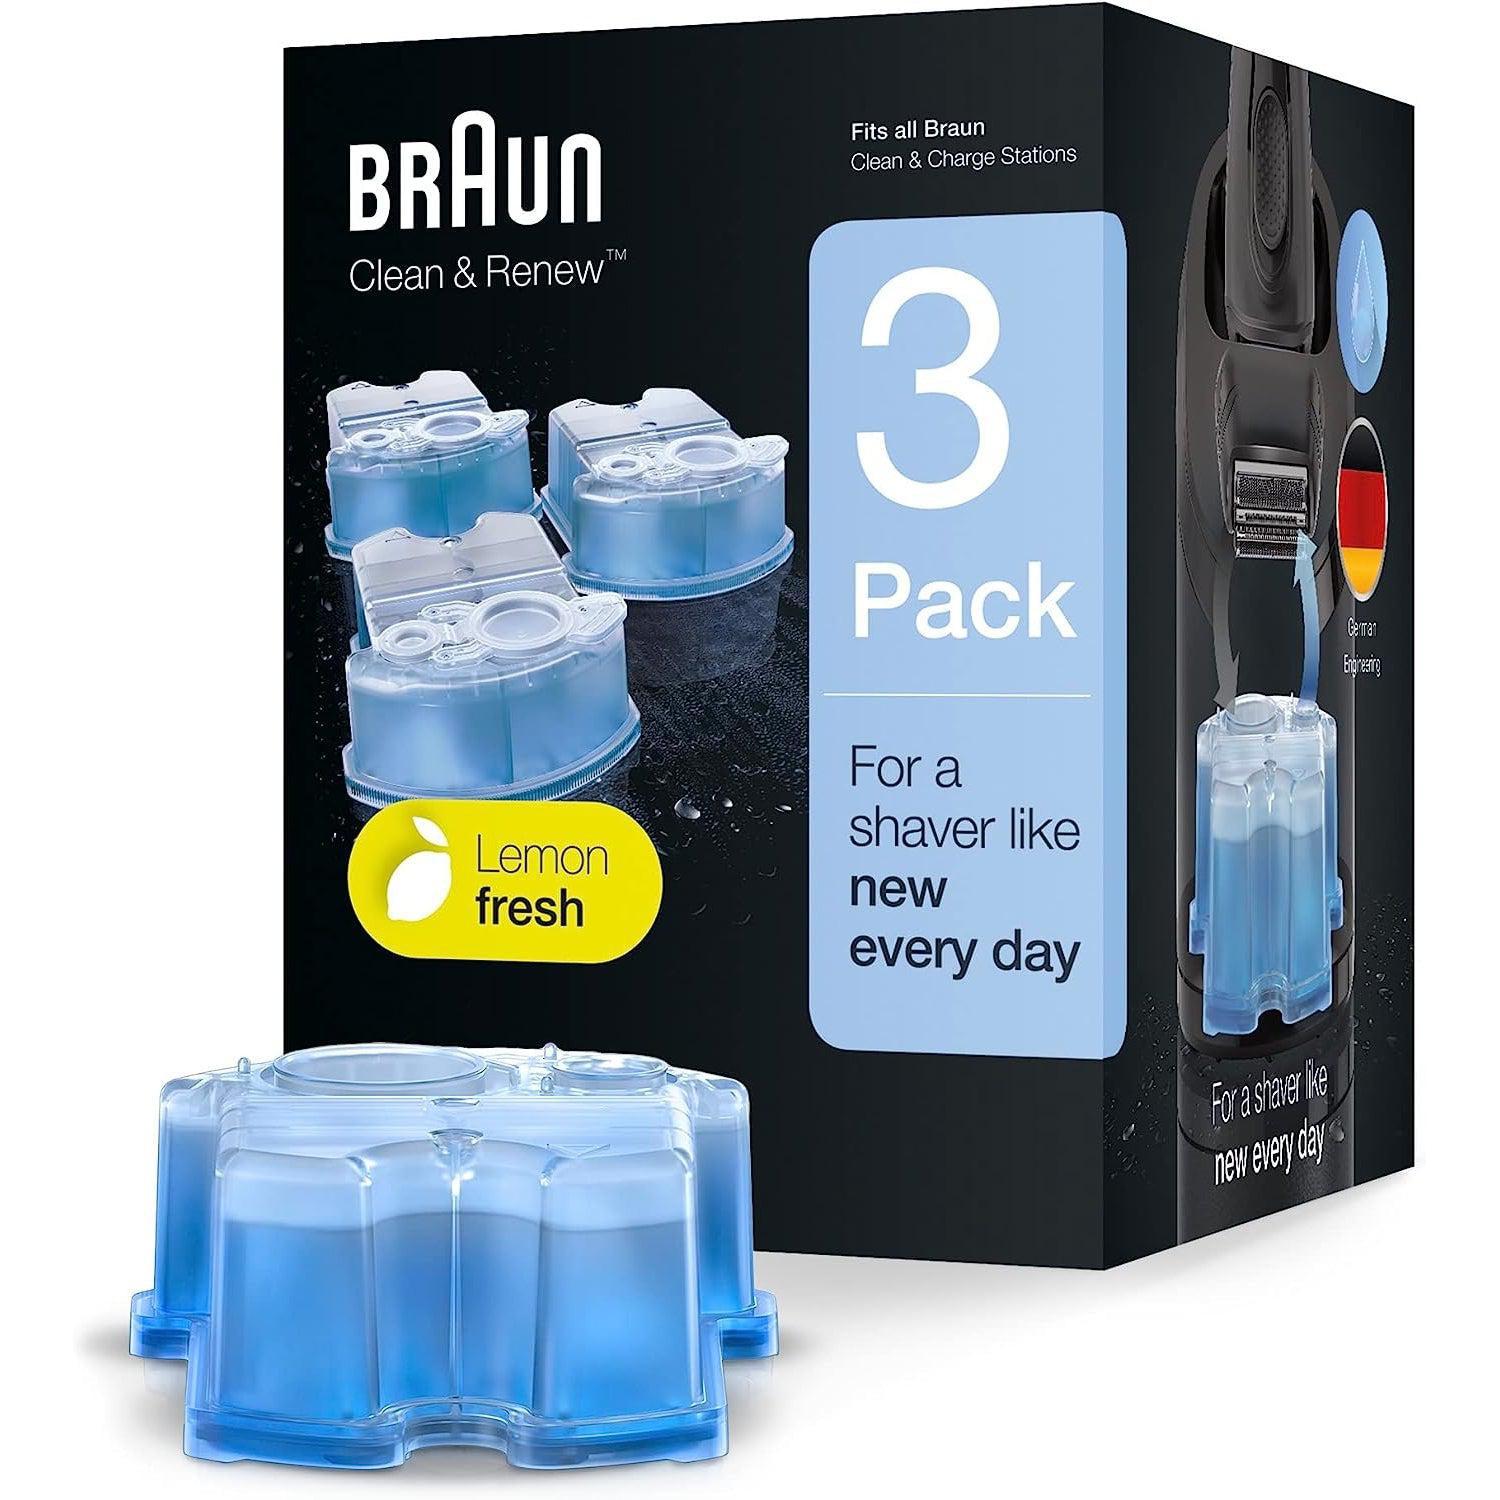 Braun CCR Clean & Renew Refill Cartridges - 100% Cleaner Compatible, 6